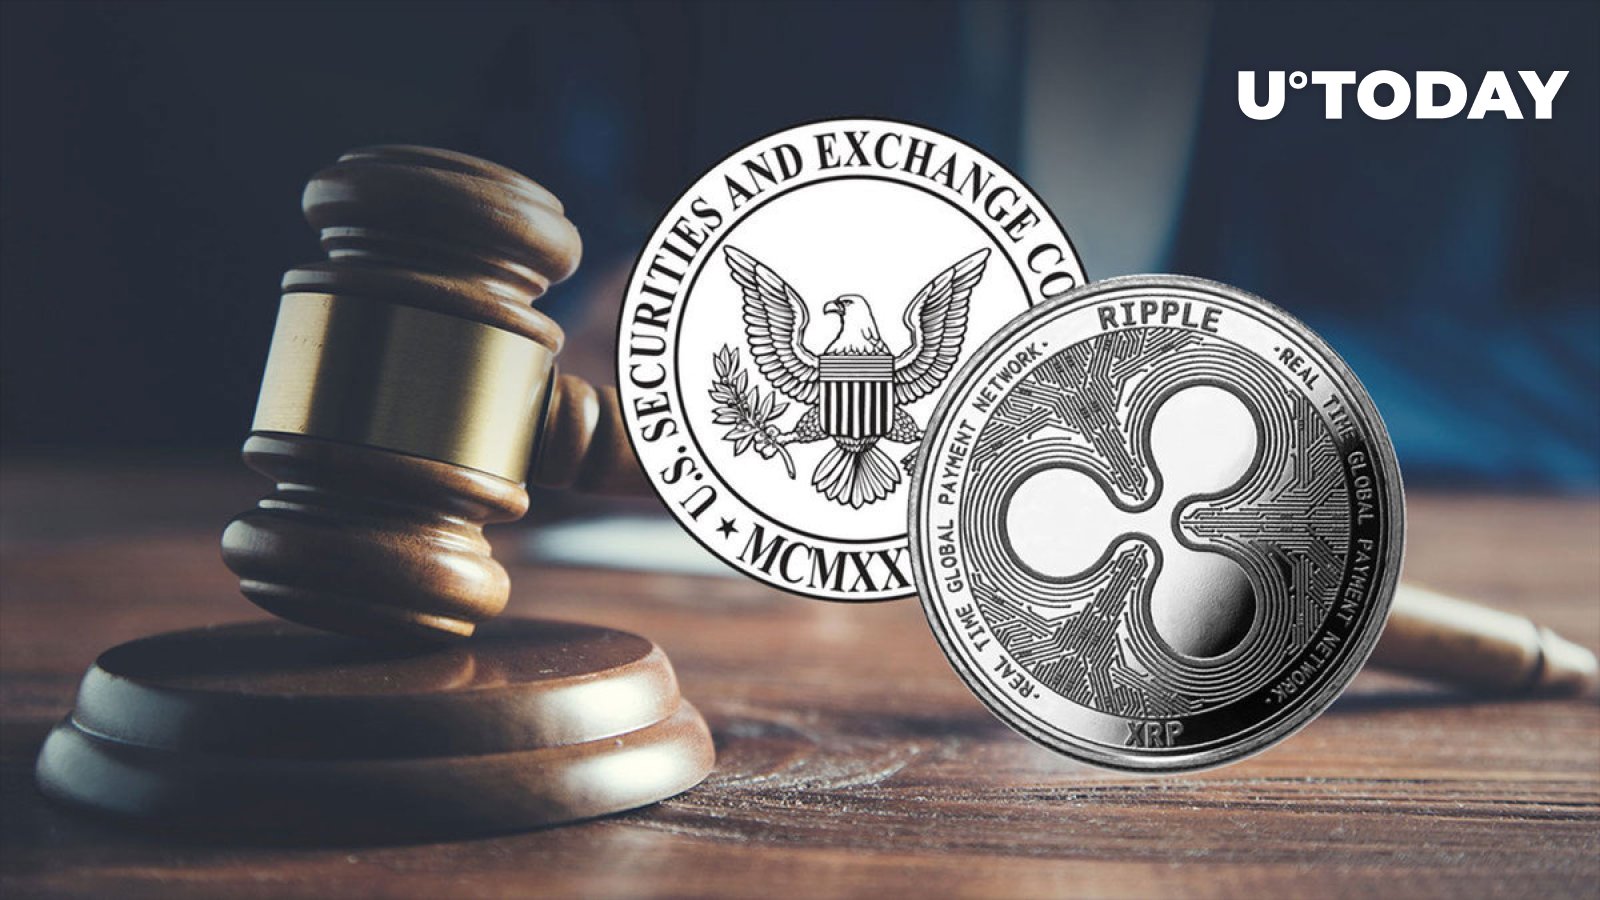 Ripple-SEC Case Update: New Motions to Be Filed by Parties, Per New Scheduling Update